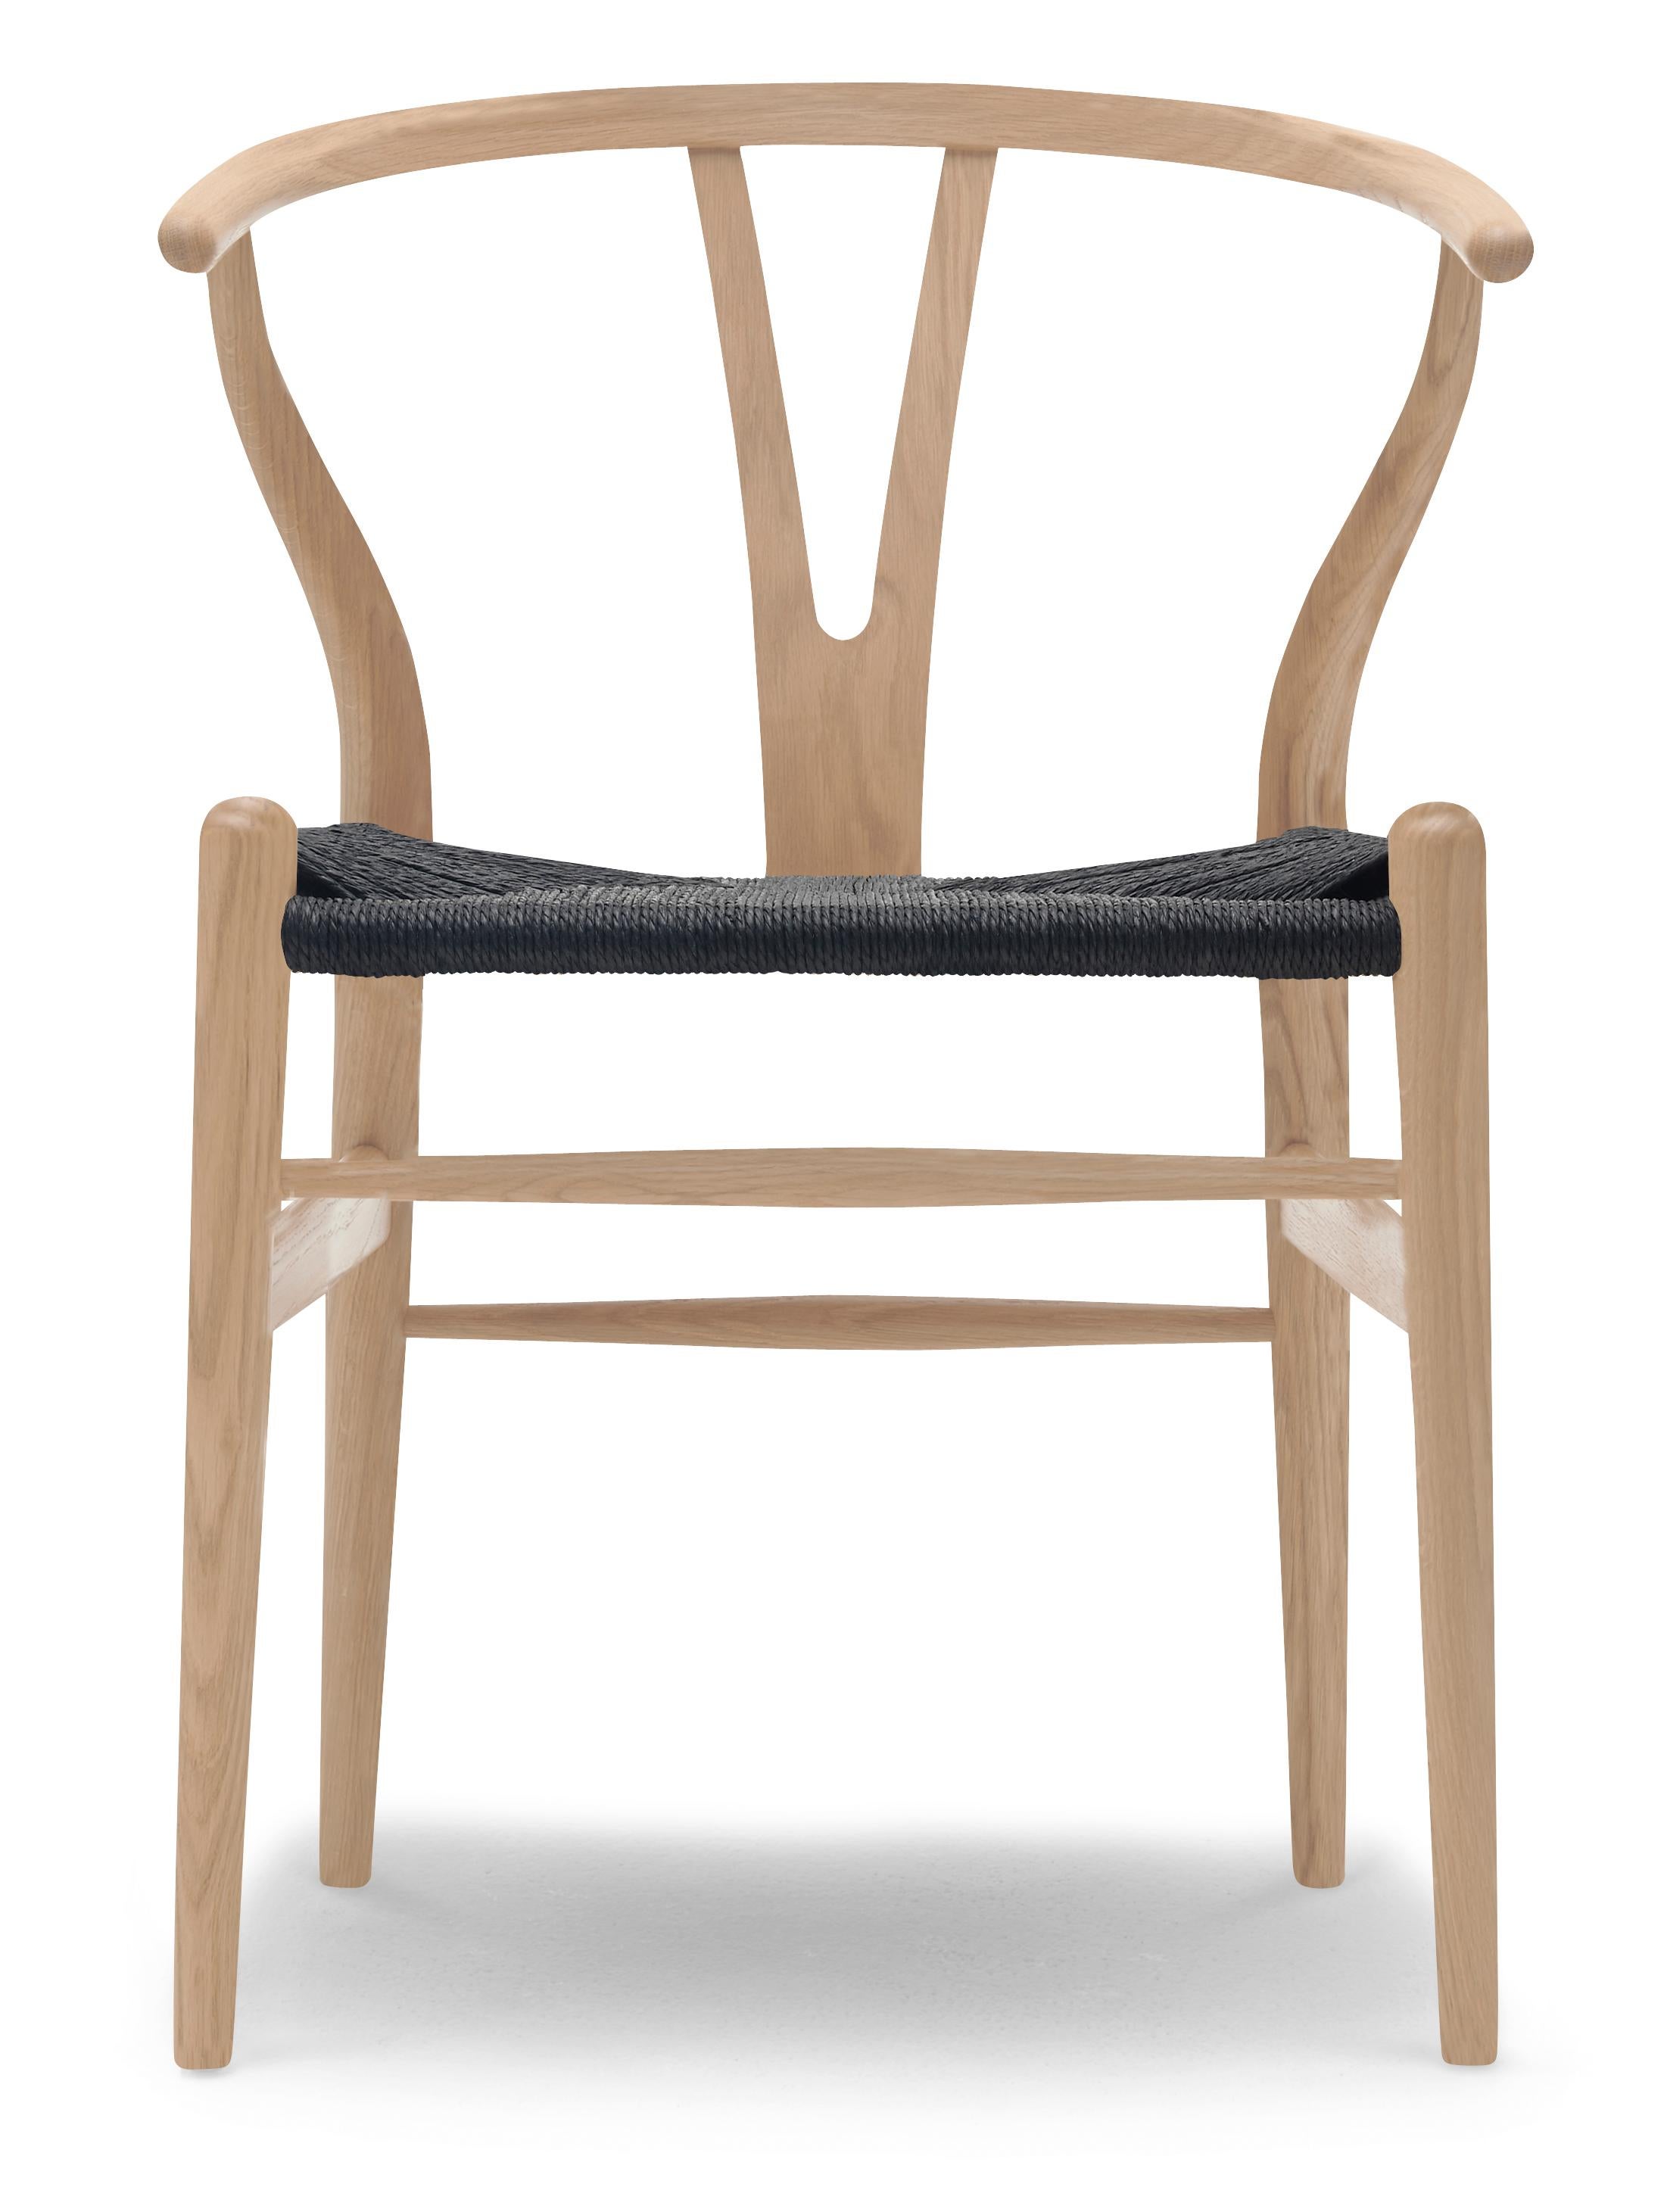 Beige (Oak White Oil) CH24 Wishbone Chair in Wood Finishes with Black Papercord Seat by Hans J. Wegner